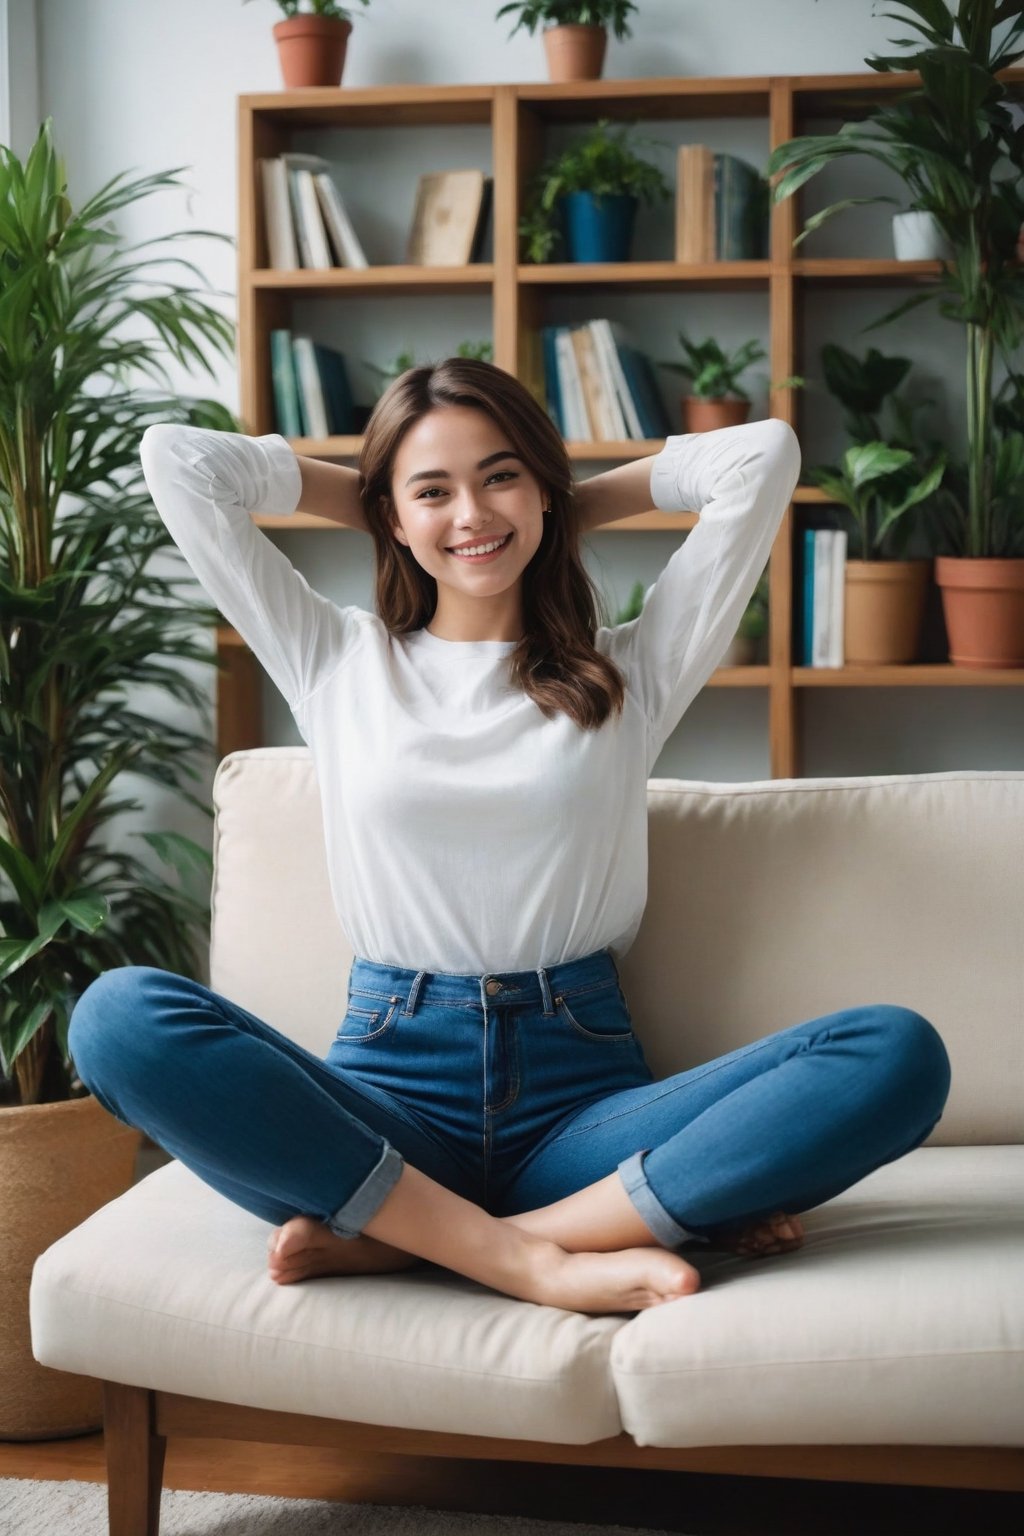  young woman is sitting cross-legged on a couch, with her hands resting behind her head and smiling. She is wearing a white long-sleeve shirt and blue denim shorts. The background is a minimalist indoor setting with a plant and a bookshelf